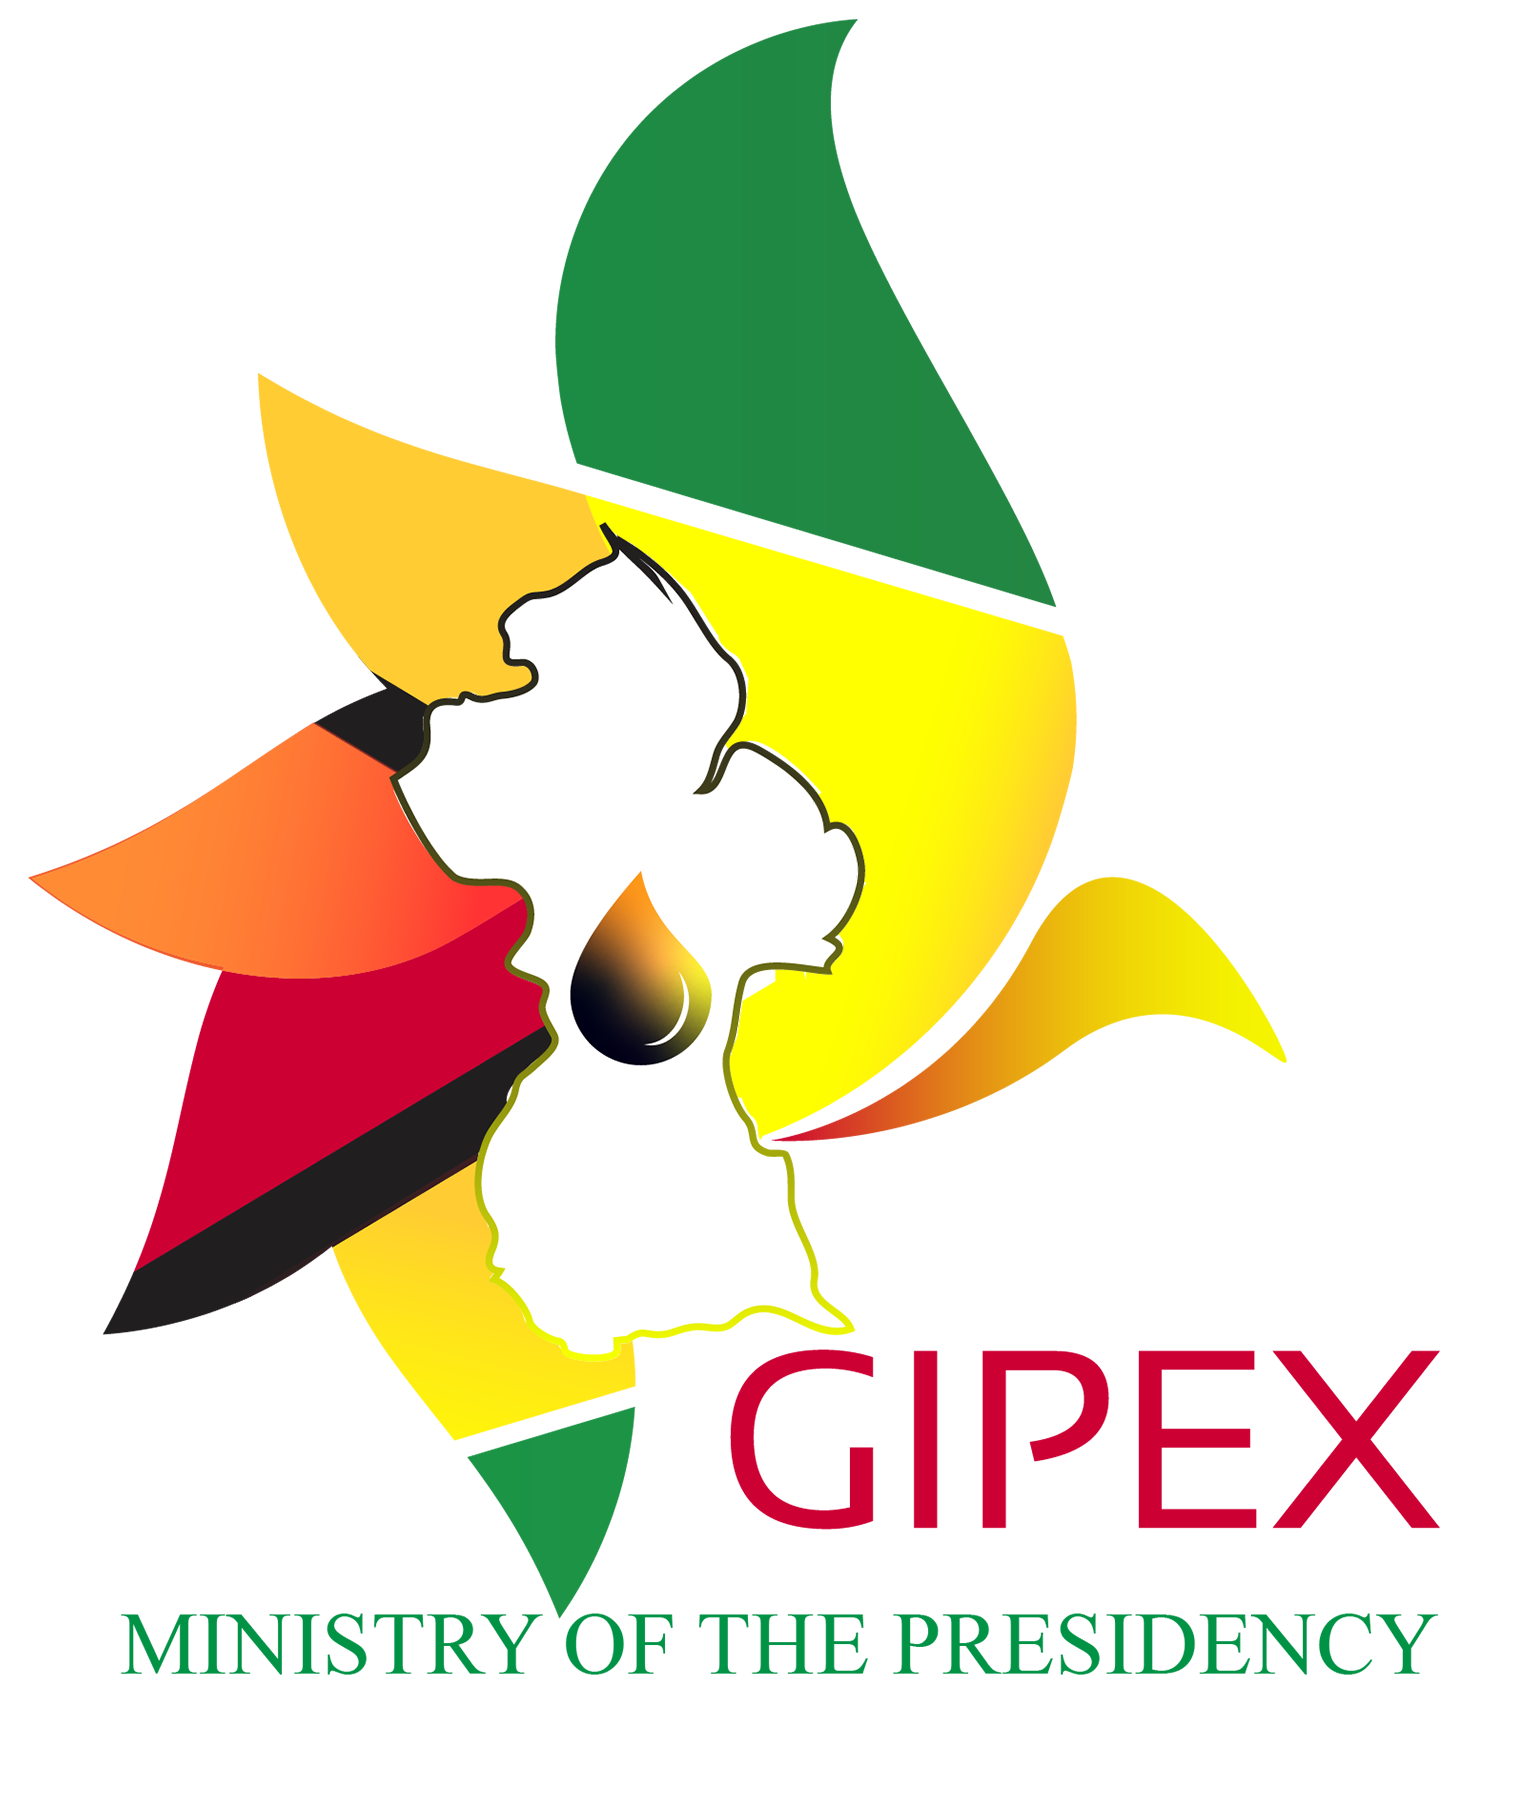 WELCOME TO GIPEX 2019.